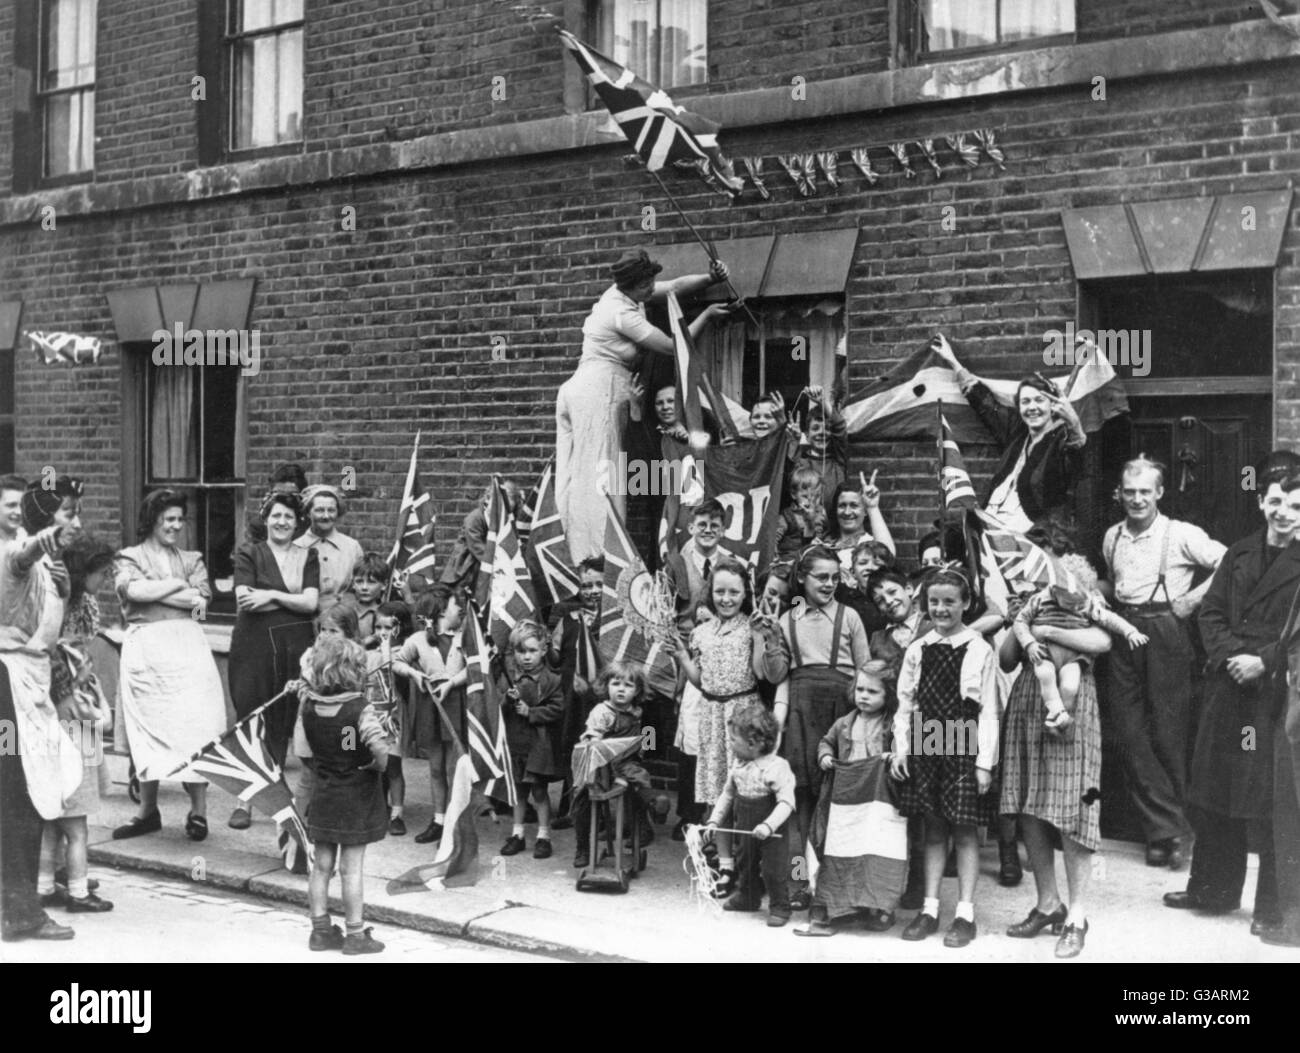 A street celebration with flags in Battersea, South London, to celebrate the end of the Second World War on VE Day.      Date: 1945 Stock Photo